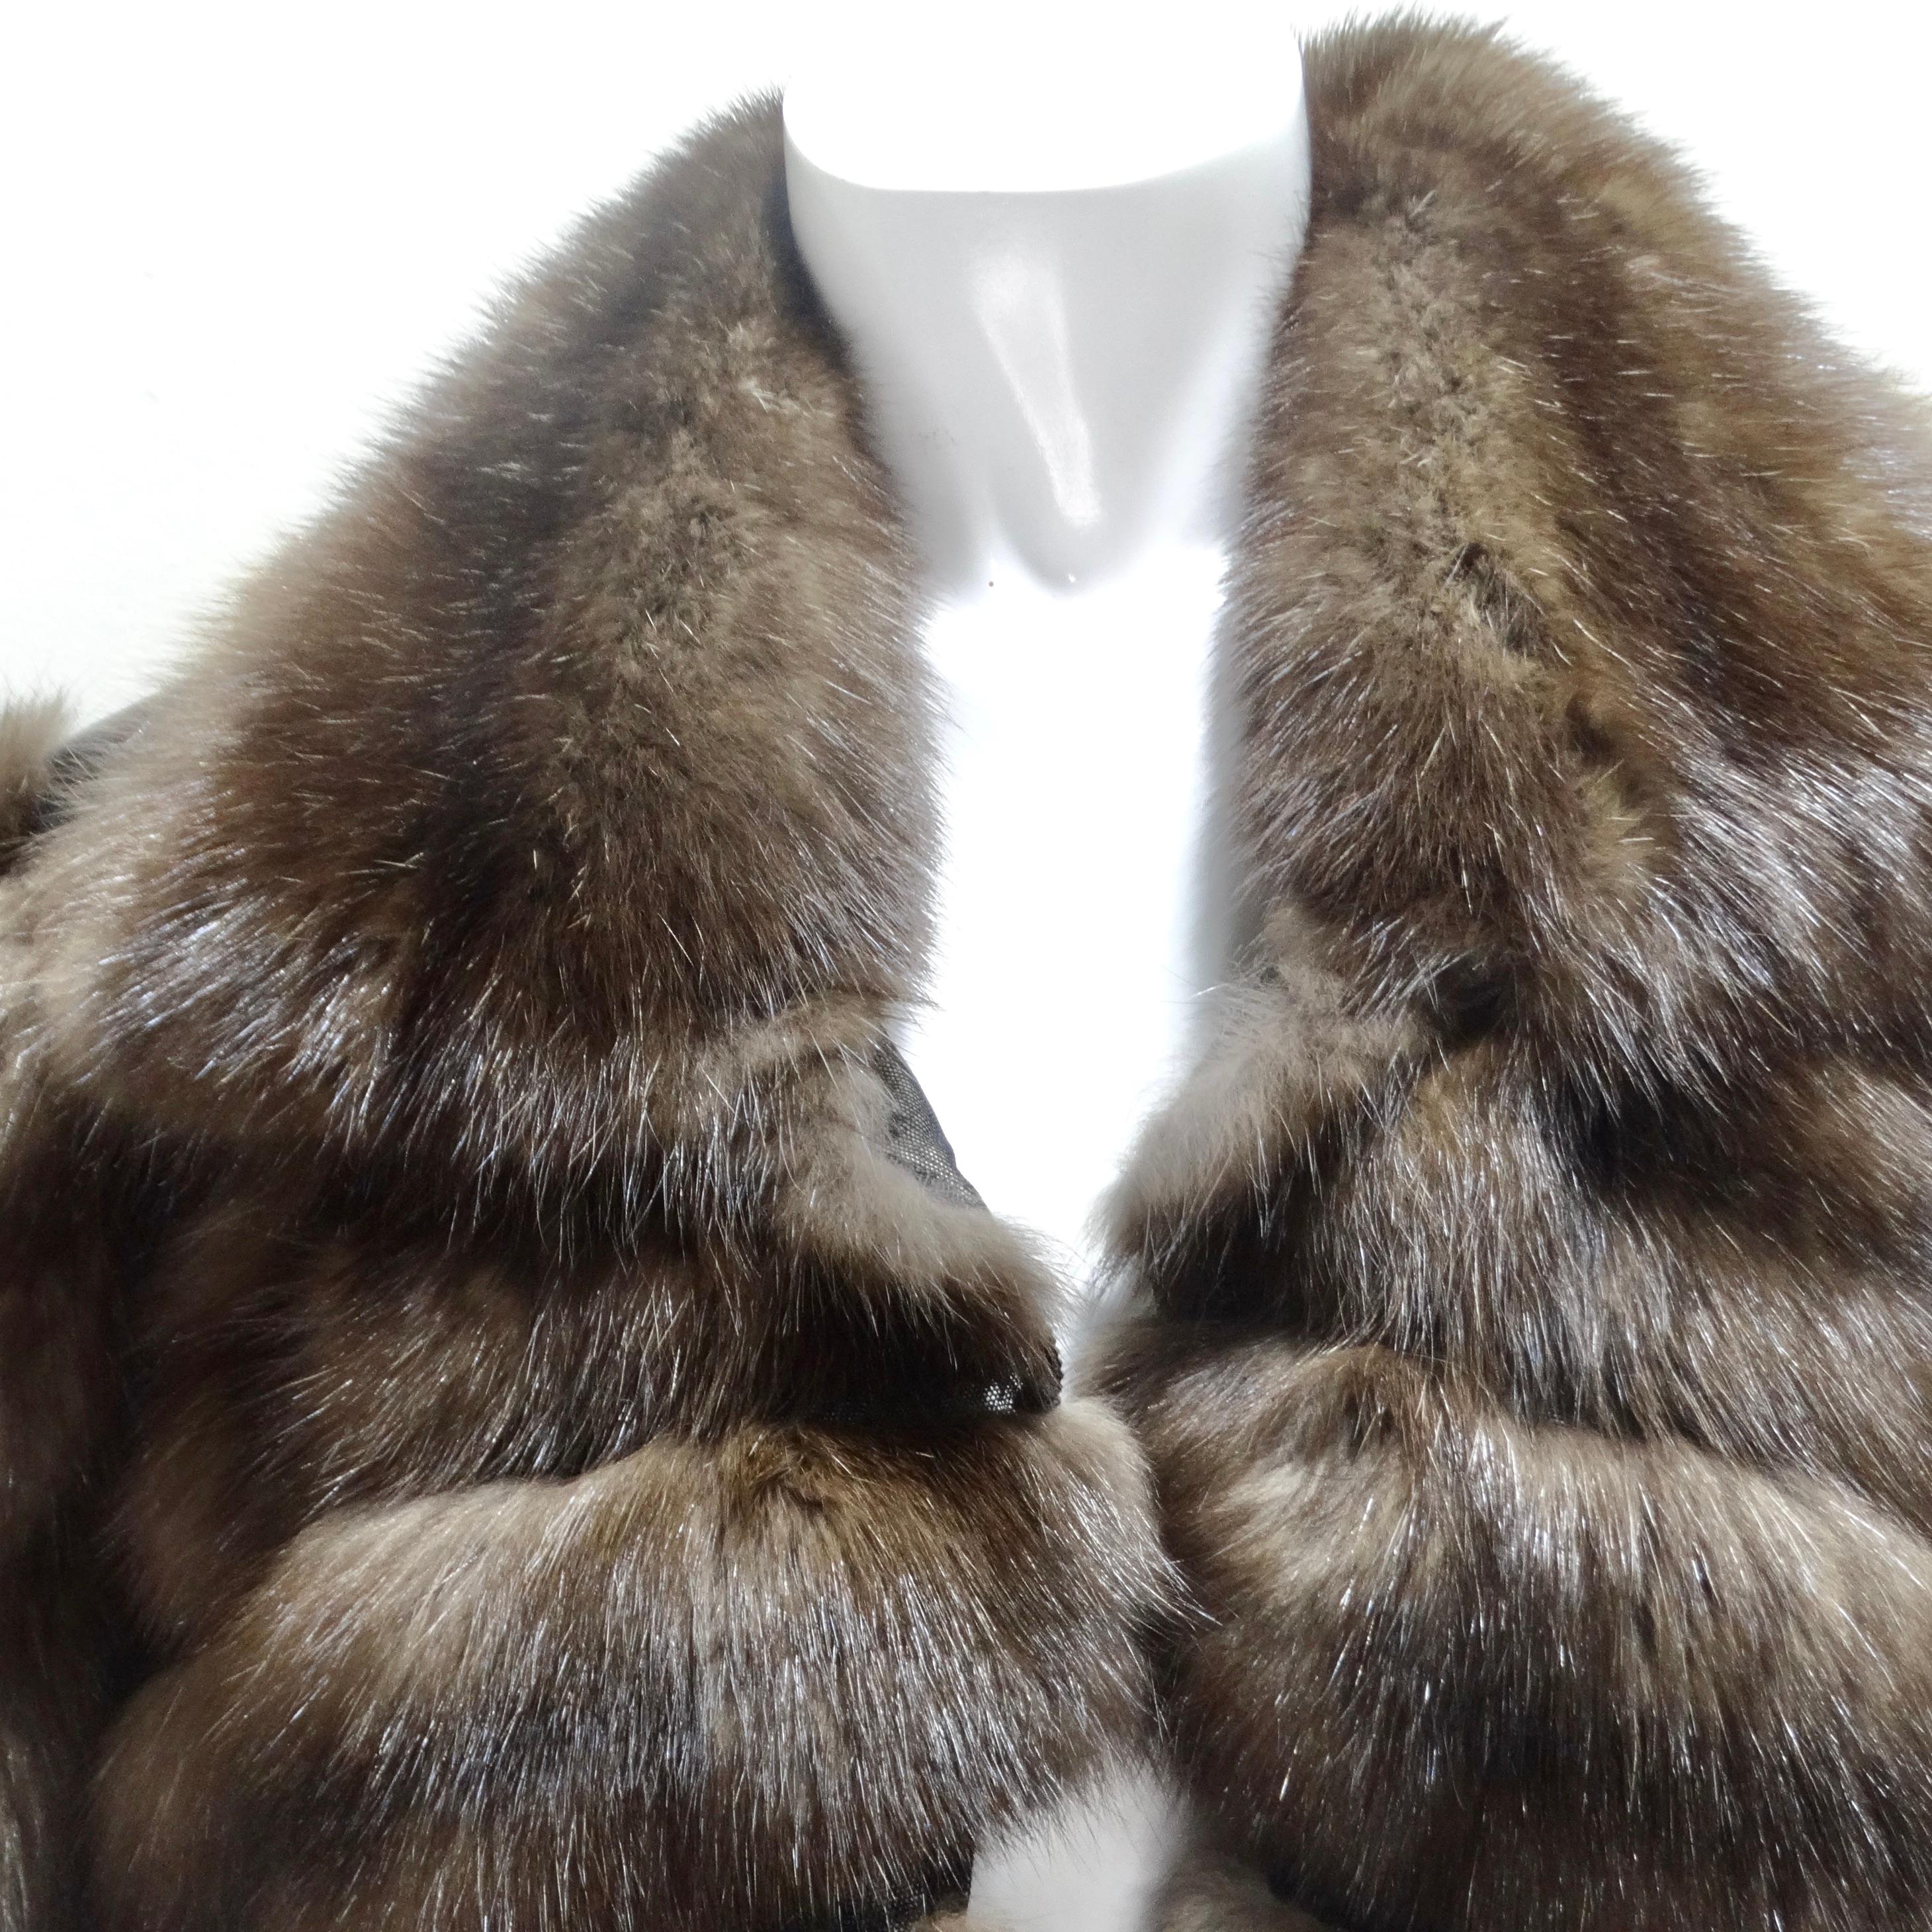 Introducing a cape that transcends fashion to become a symbol of opulence and timeless sophistication - the Dennis Basso Russian Sable Cropped Cape. This beautiful cropped cape features luxurious brown Russian sable fur complemented by hints of